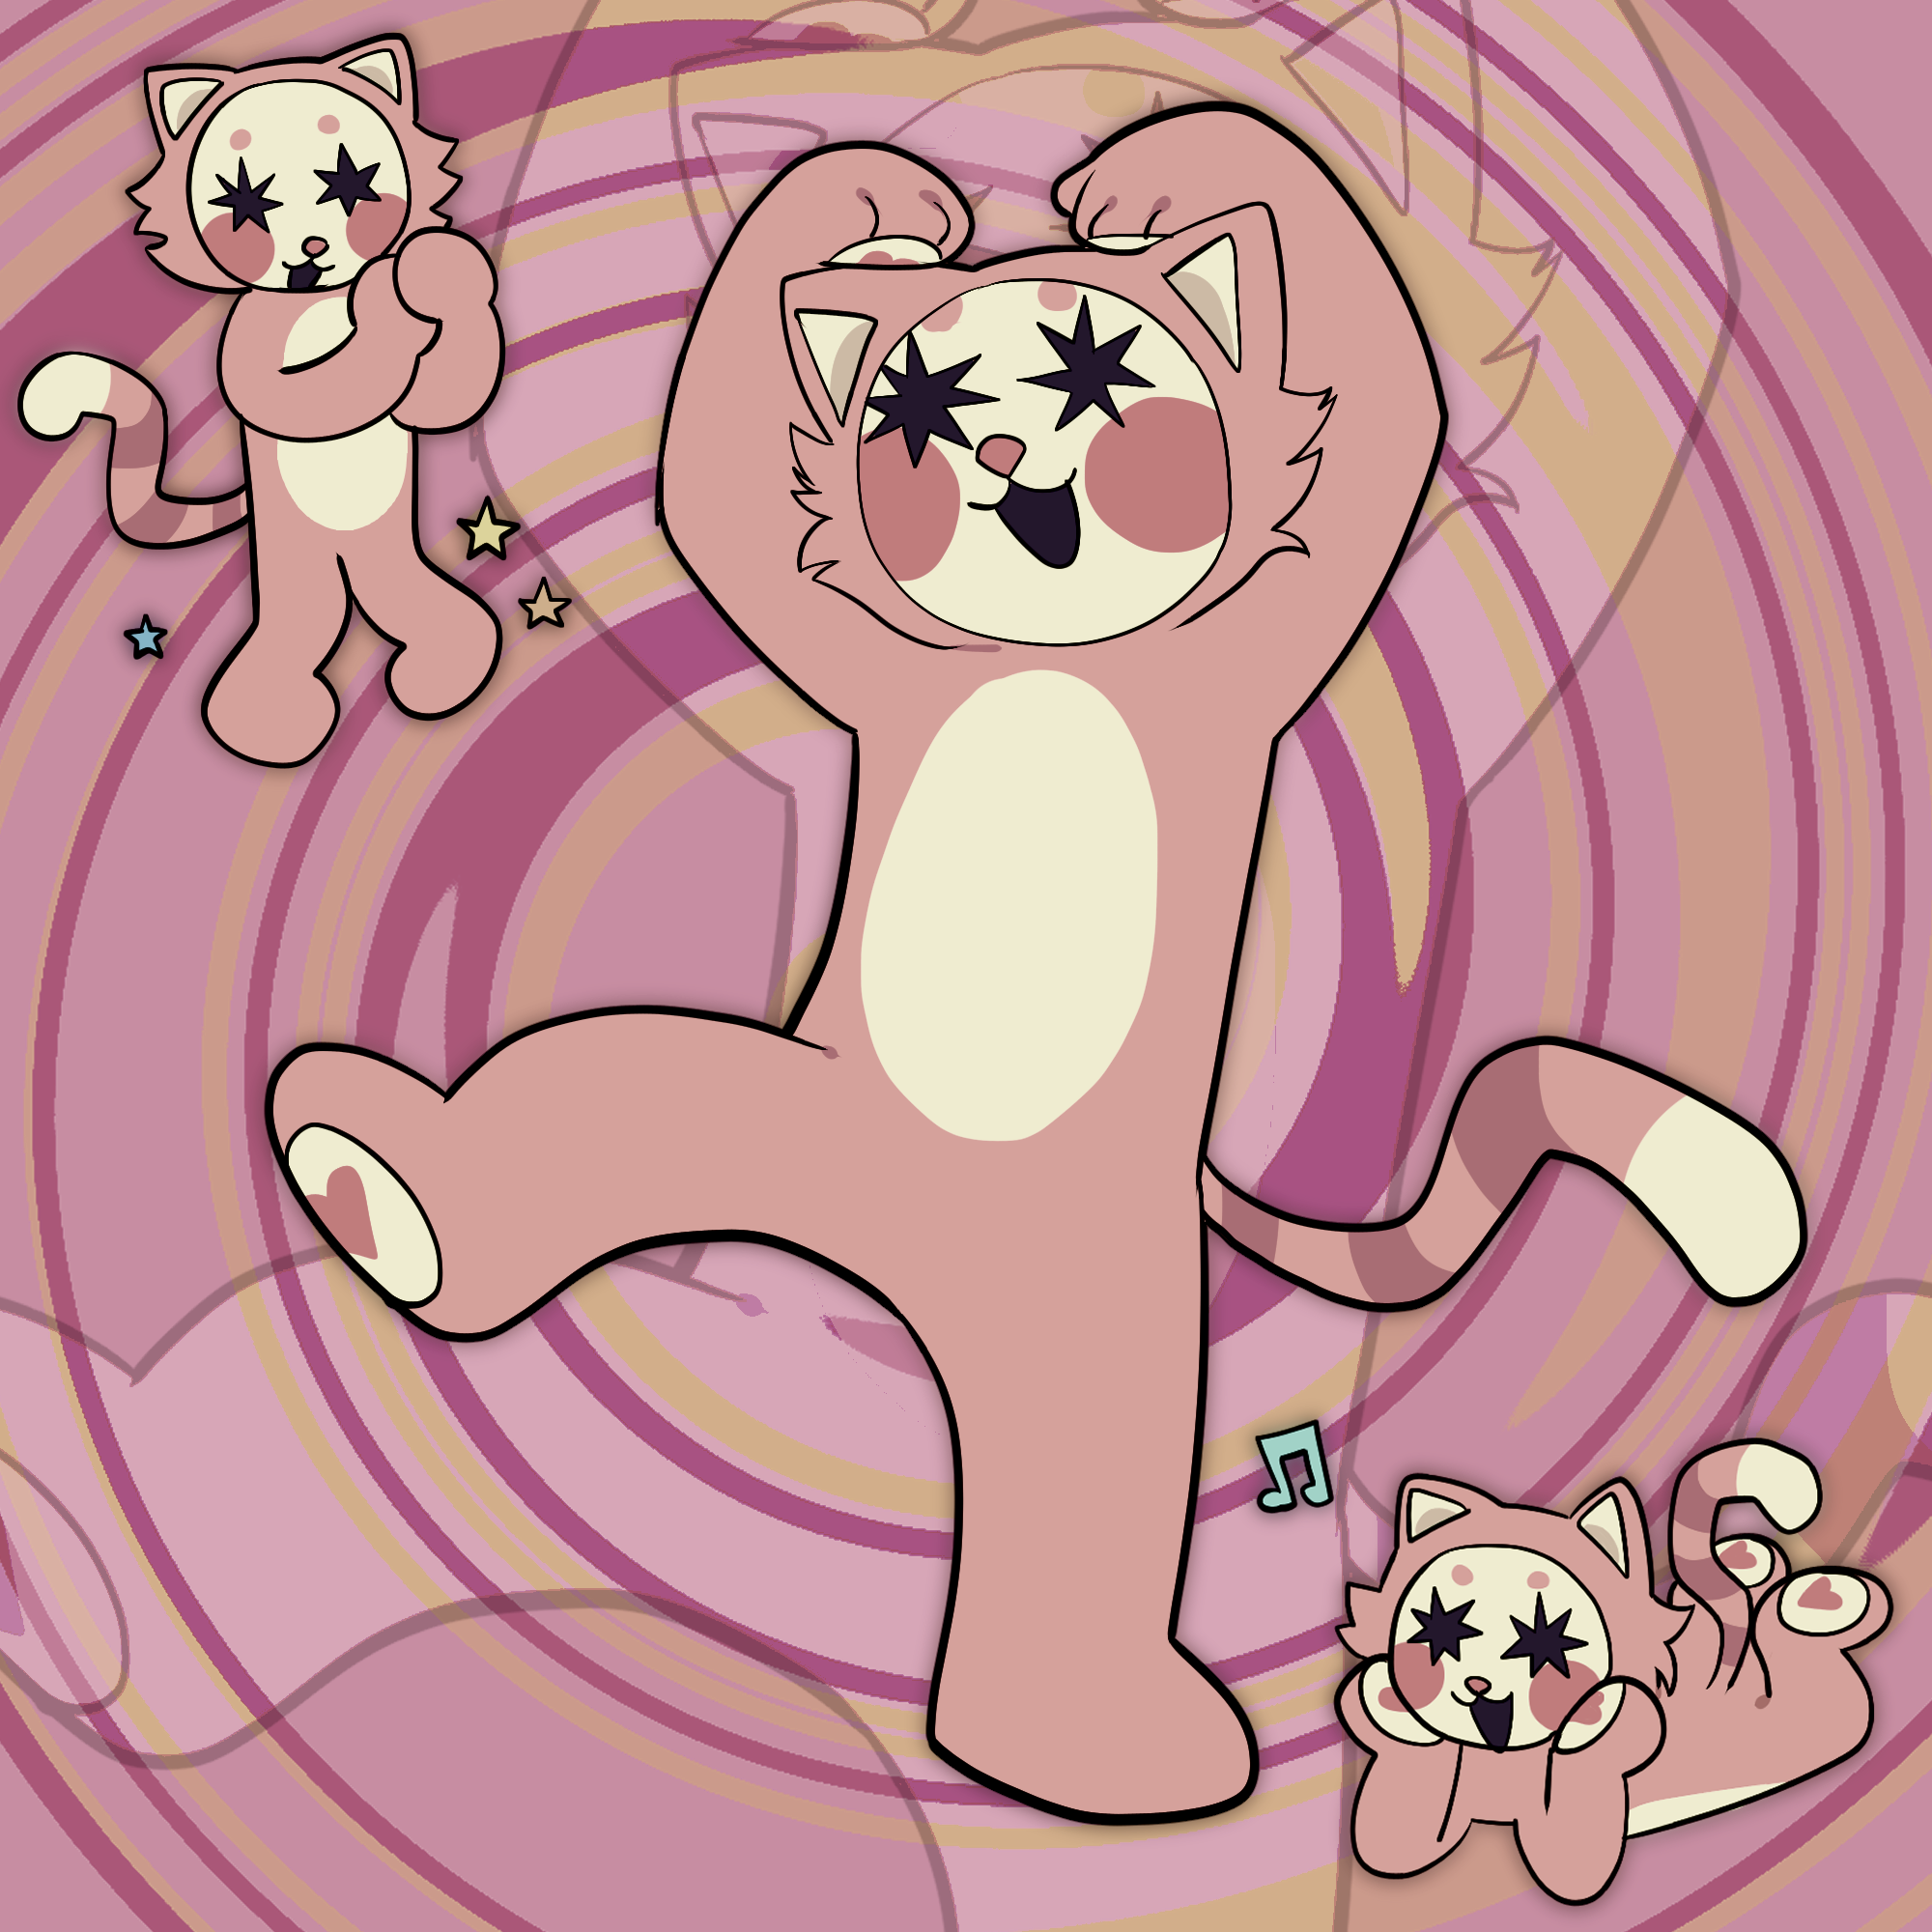 A cartoony illustration of an anthropomorphic, cat-like character with a striped tail and pink hearts on its paw pads. It is wearing a white mask with black stars for eyes and pink circular blush on its cheeks. In the middle, the character is depicted dancing with its hands on its head. In the upper left-hand corner, there is a chibi version of the same character clasping its hands together. In the lower right-hand corner, the character is laying on its belly with its legs kicked up as it rests its head in its palms.